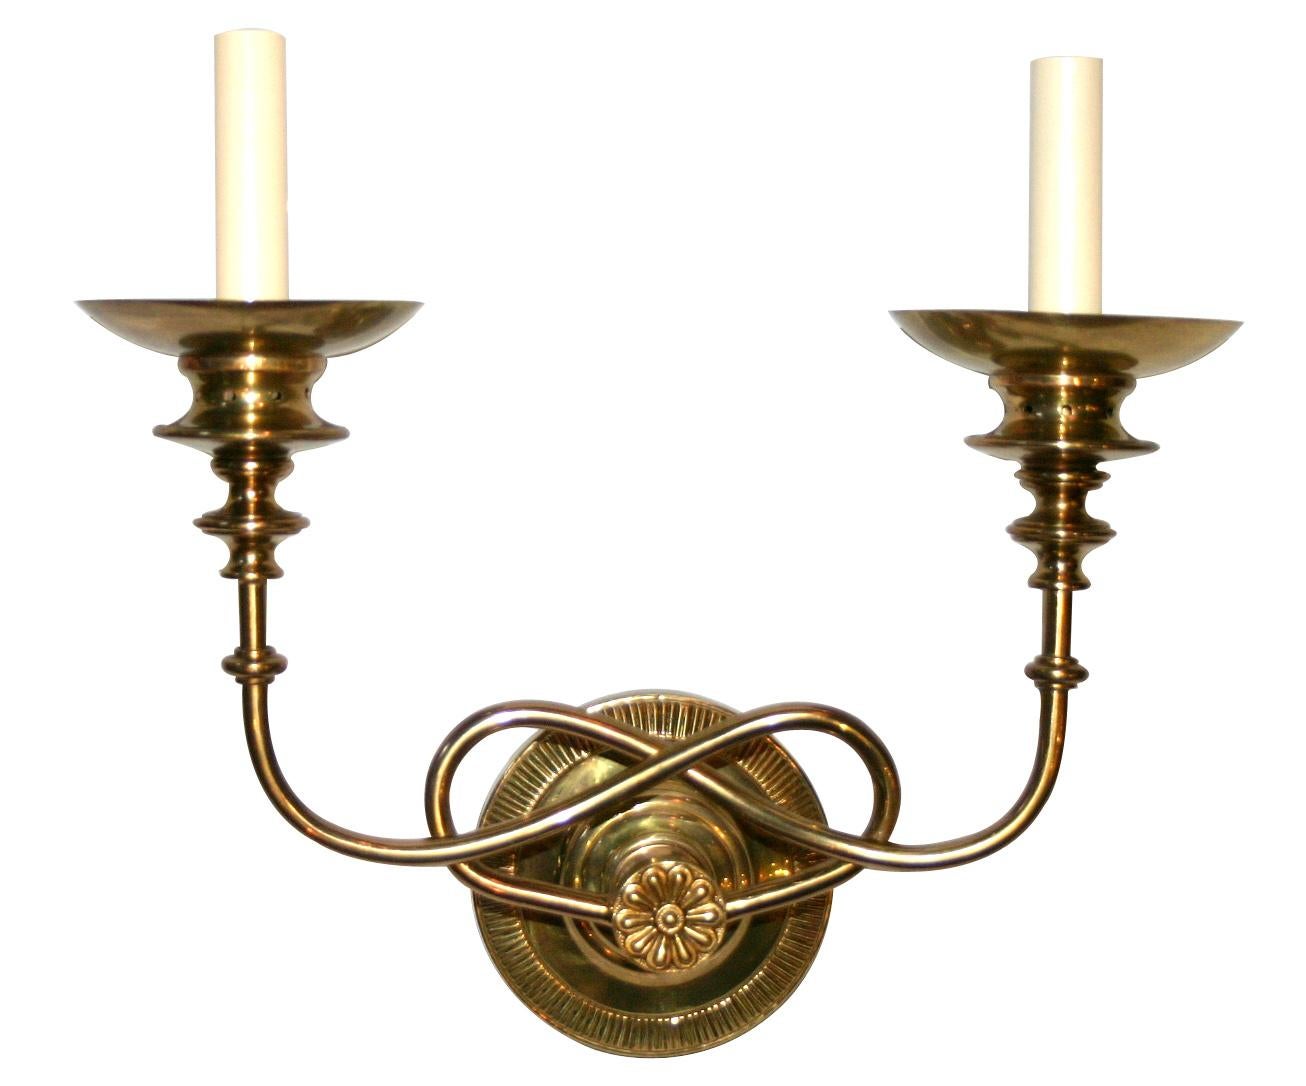 Set of four circa 1940's French gilt bronze sconces with twisted arms and original gilt finish. Sold per pair.

Measurements:
Height: 13?
Width: 14.5?
Depth: 6.25?